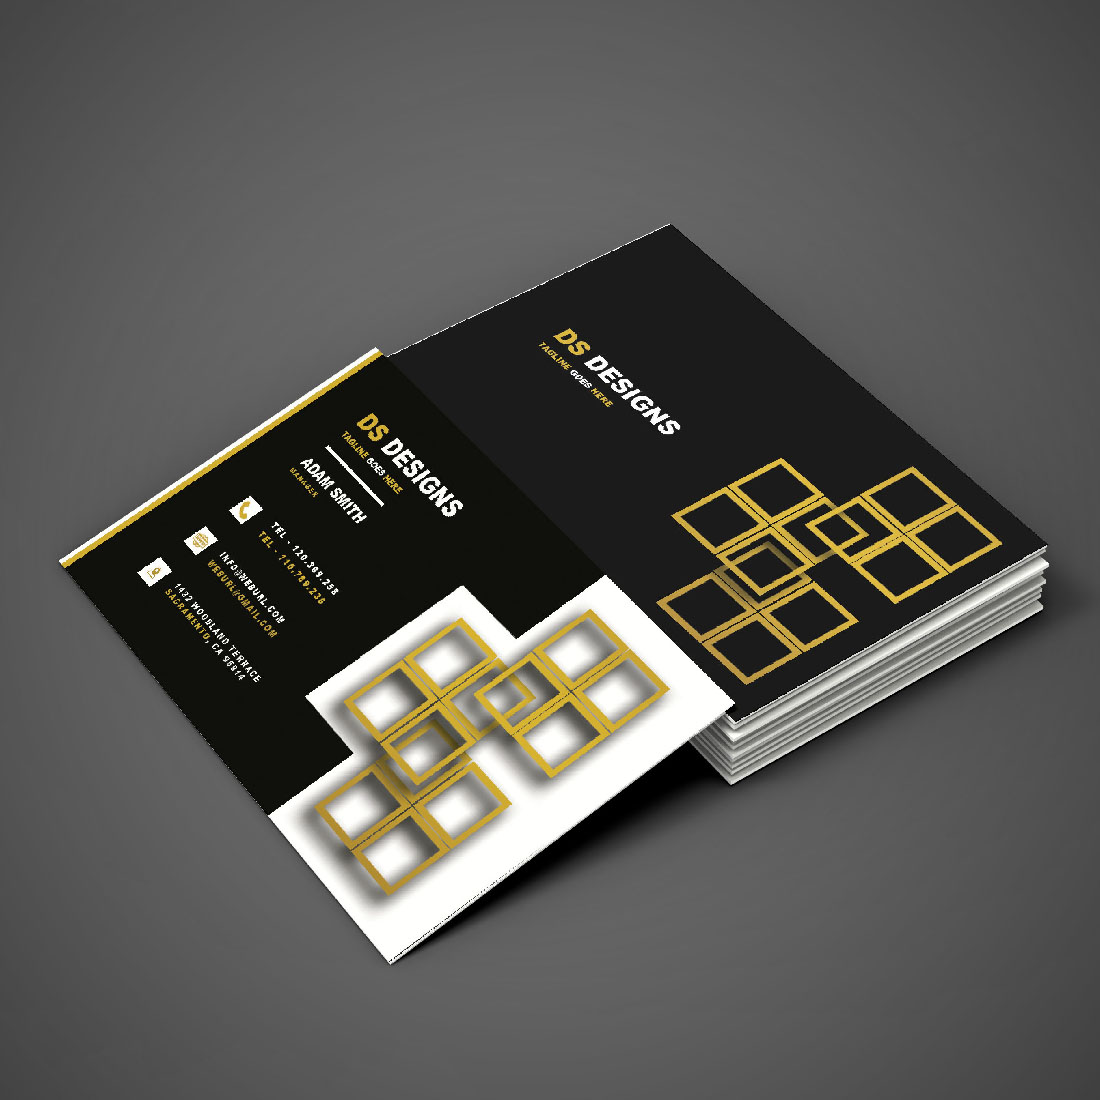 Luxury Simple Business Card Template cover image.